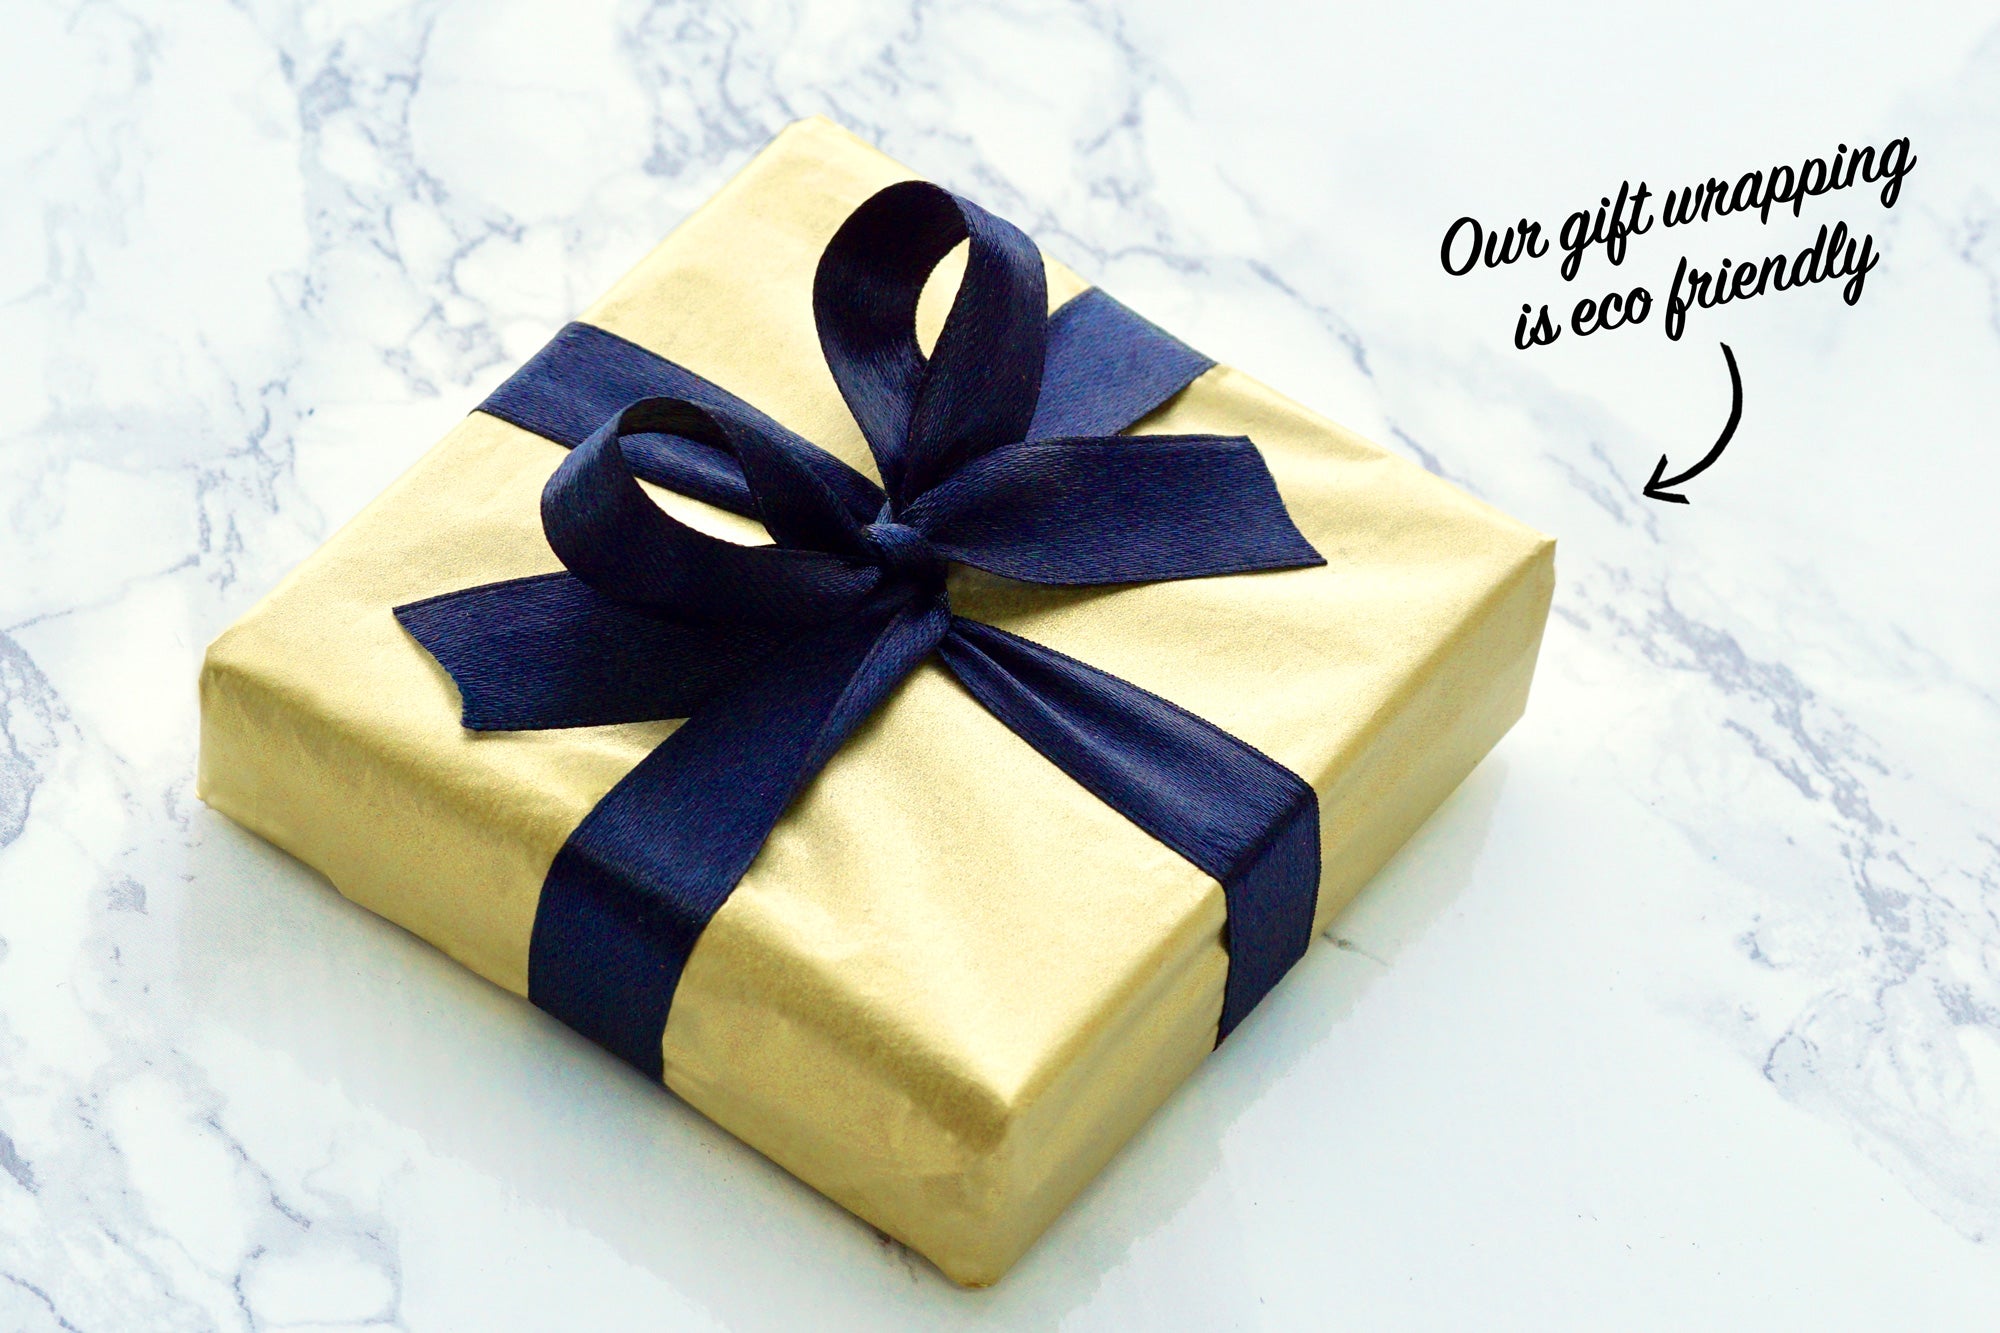 Our gift wrapping is eco friendly too